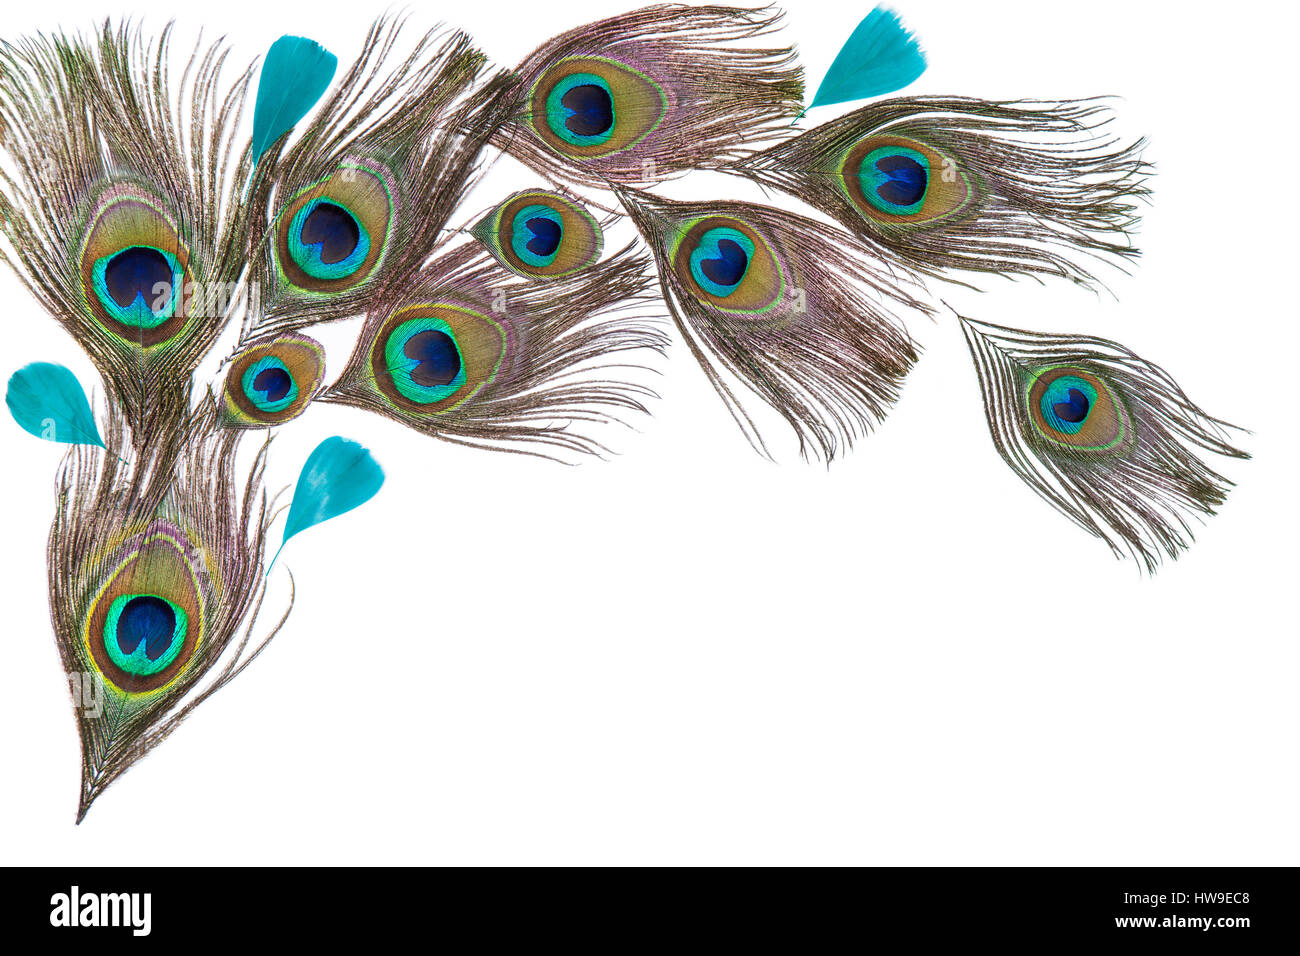 Green peacock feathers on the white background Stock Photo